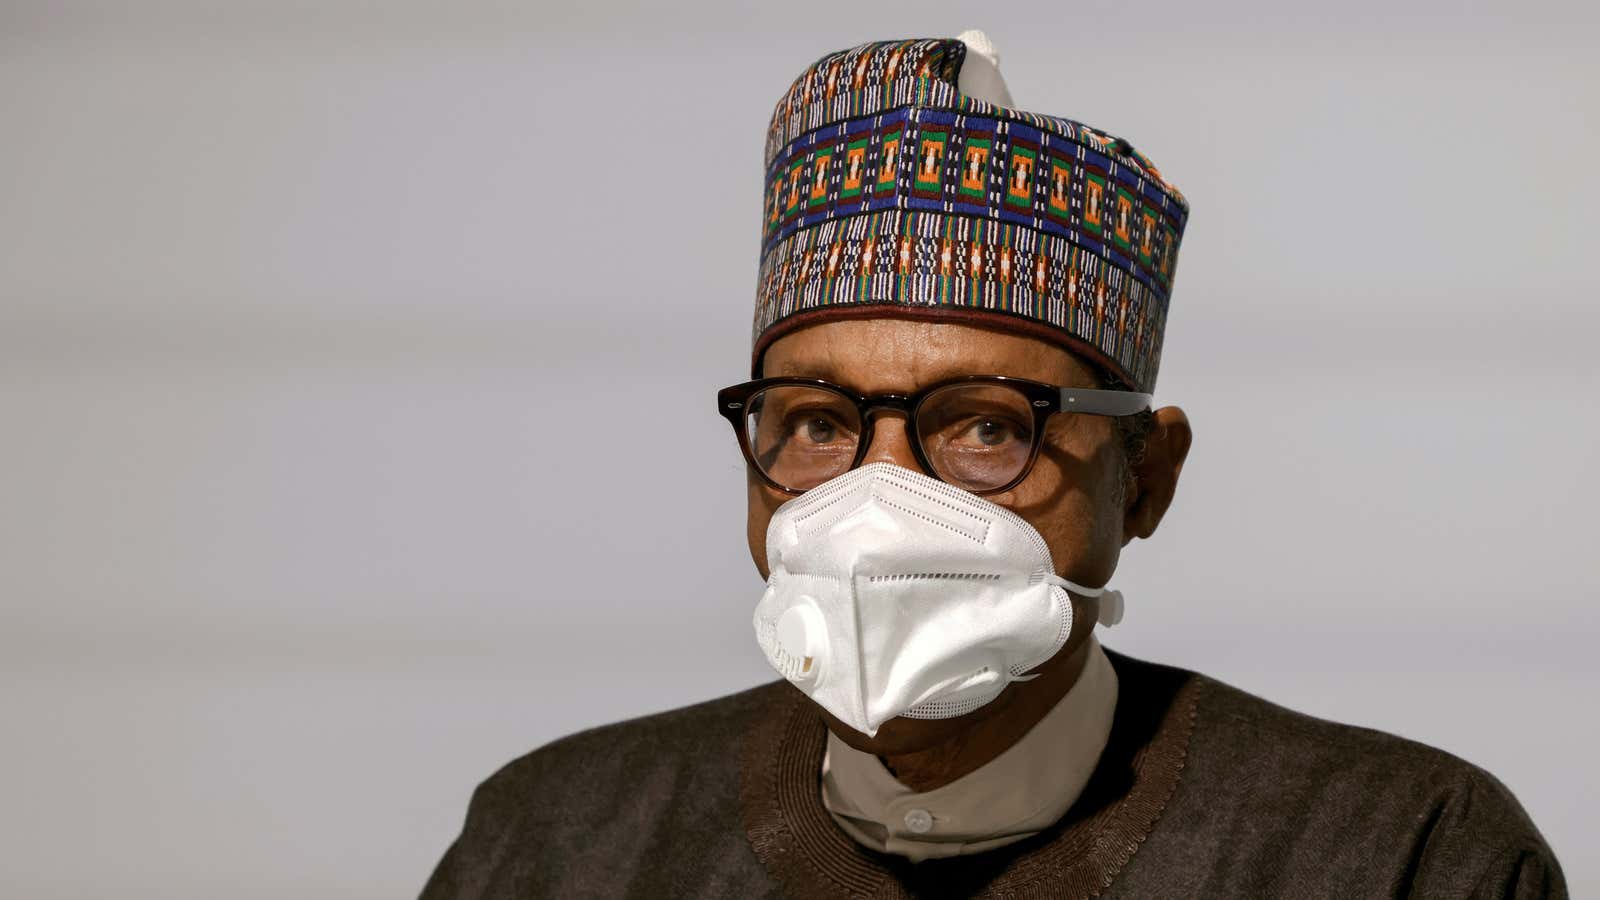 FILE PHOTO: Nigeria’s President Muhammadu Buhari poses before the opening session of the Summit on the Financing of African Economies in Paris, France May 18, 2021. Ludovic Marin/Pool via REUTERS/File Photo